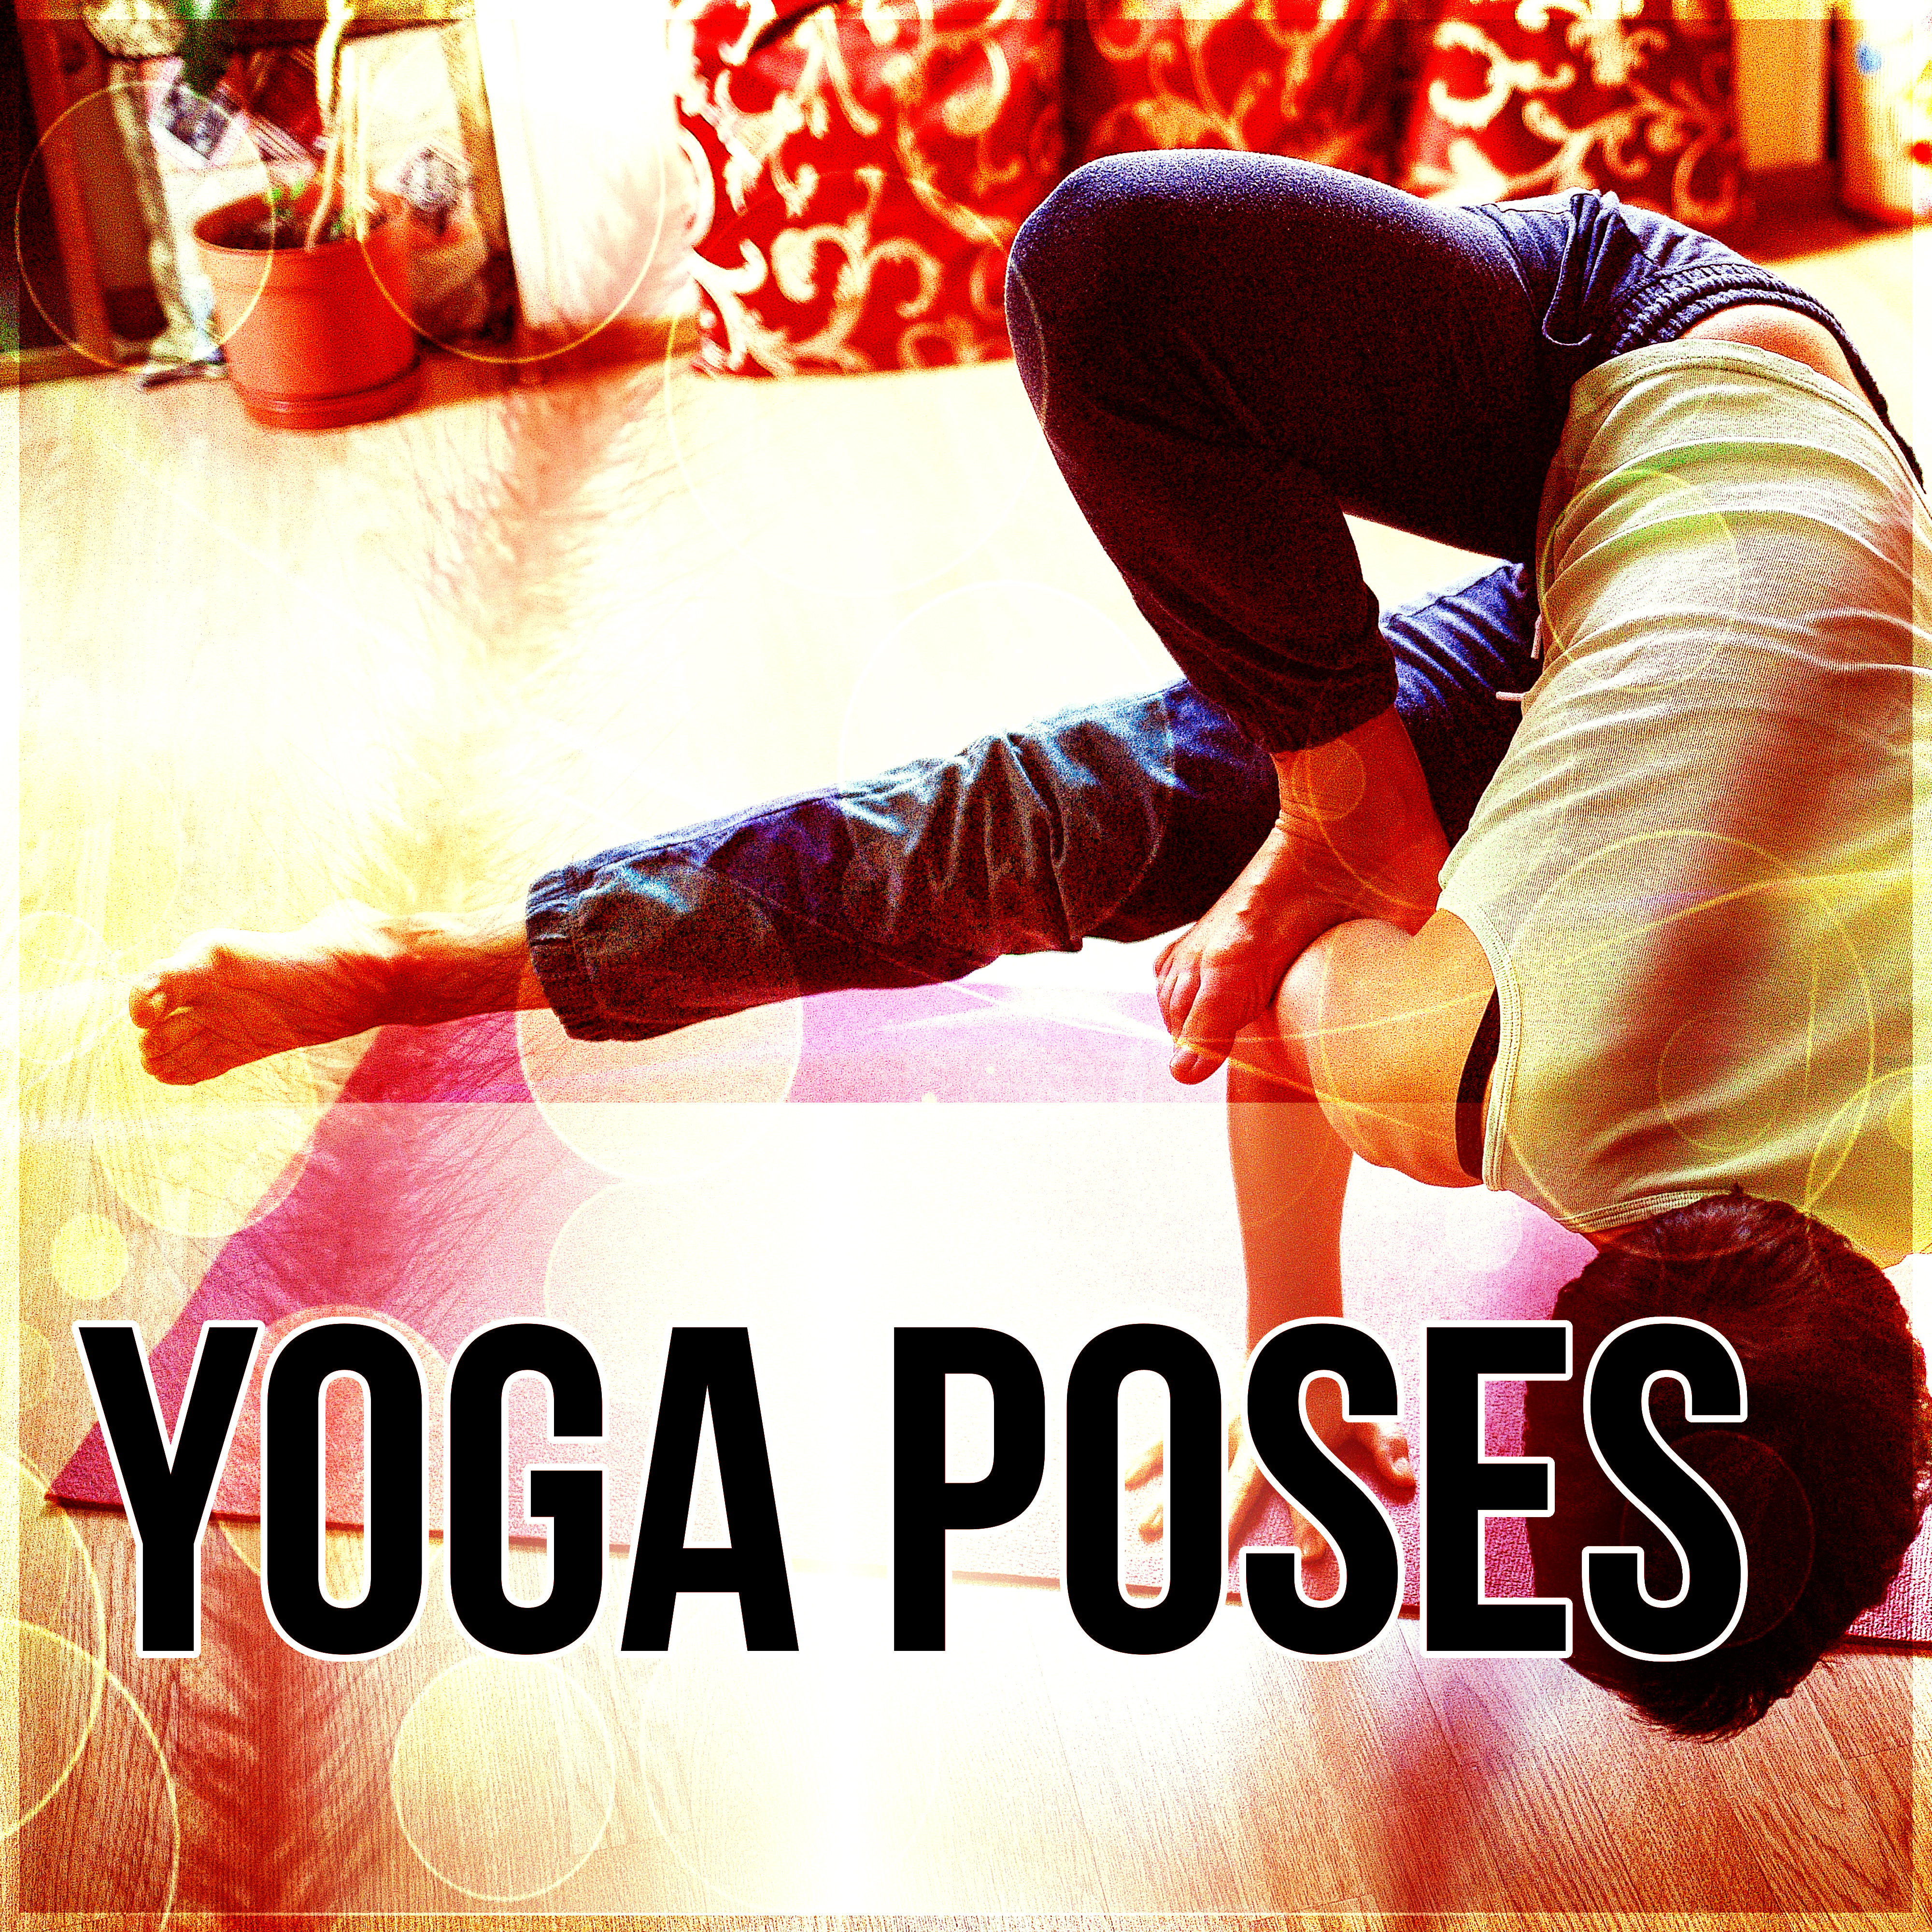 Yoga Poses – Calming Music for Yoga Practice, Asian Zen Spa, Massage for Deep Sleep & Relaxation, Tantra with Nature Sounds